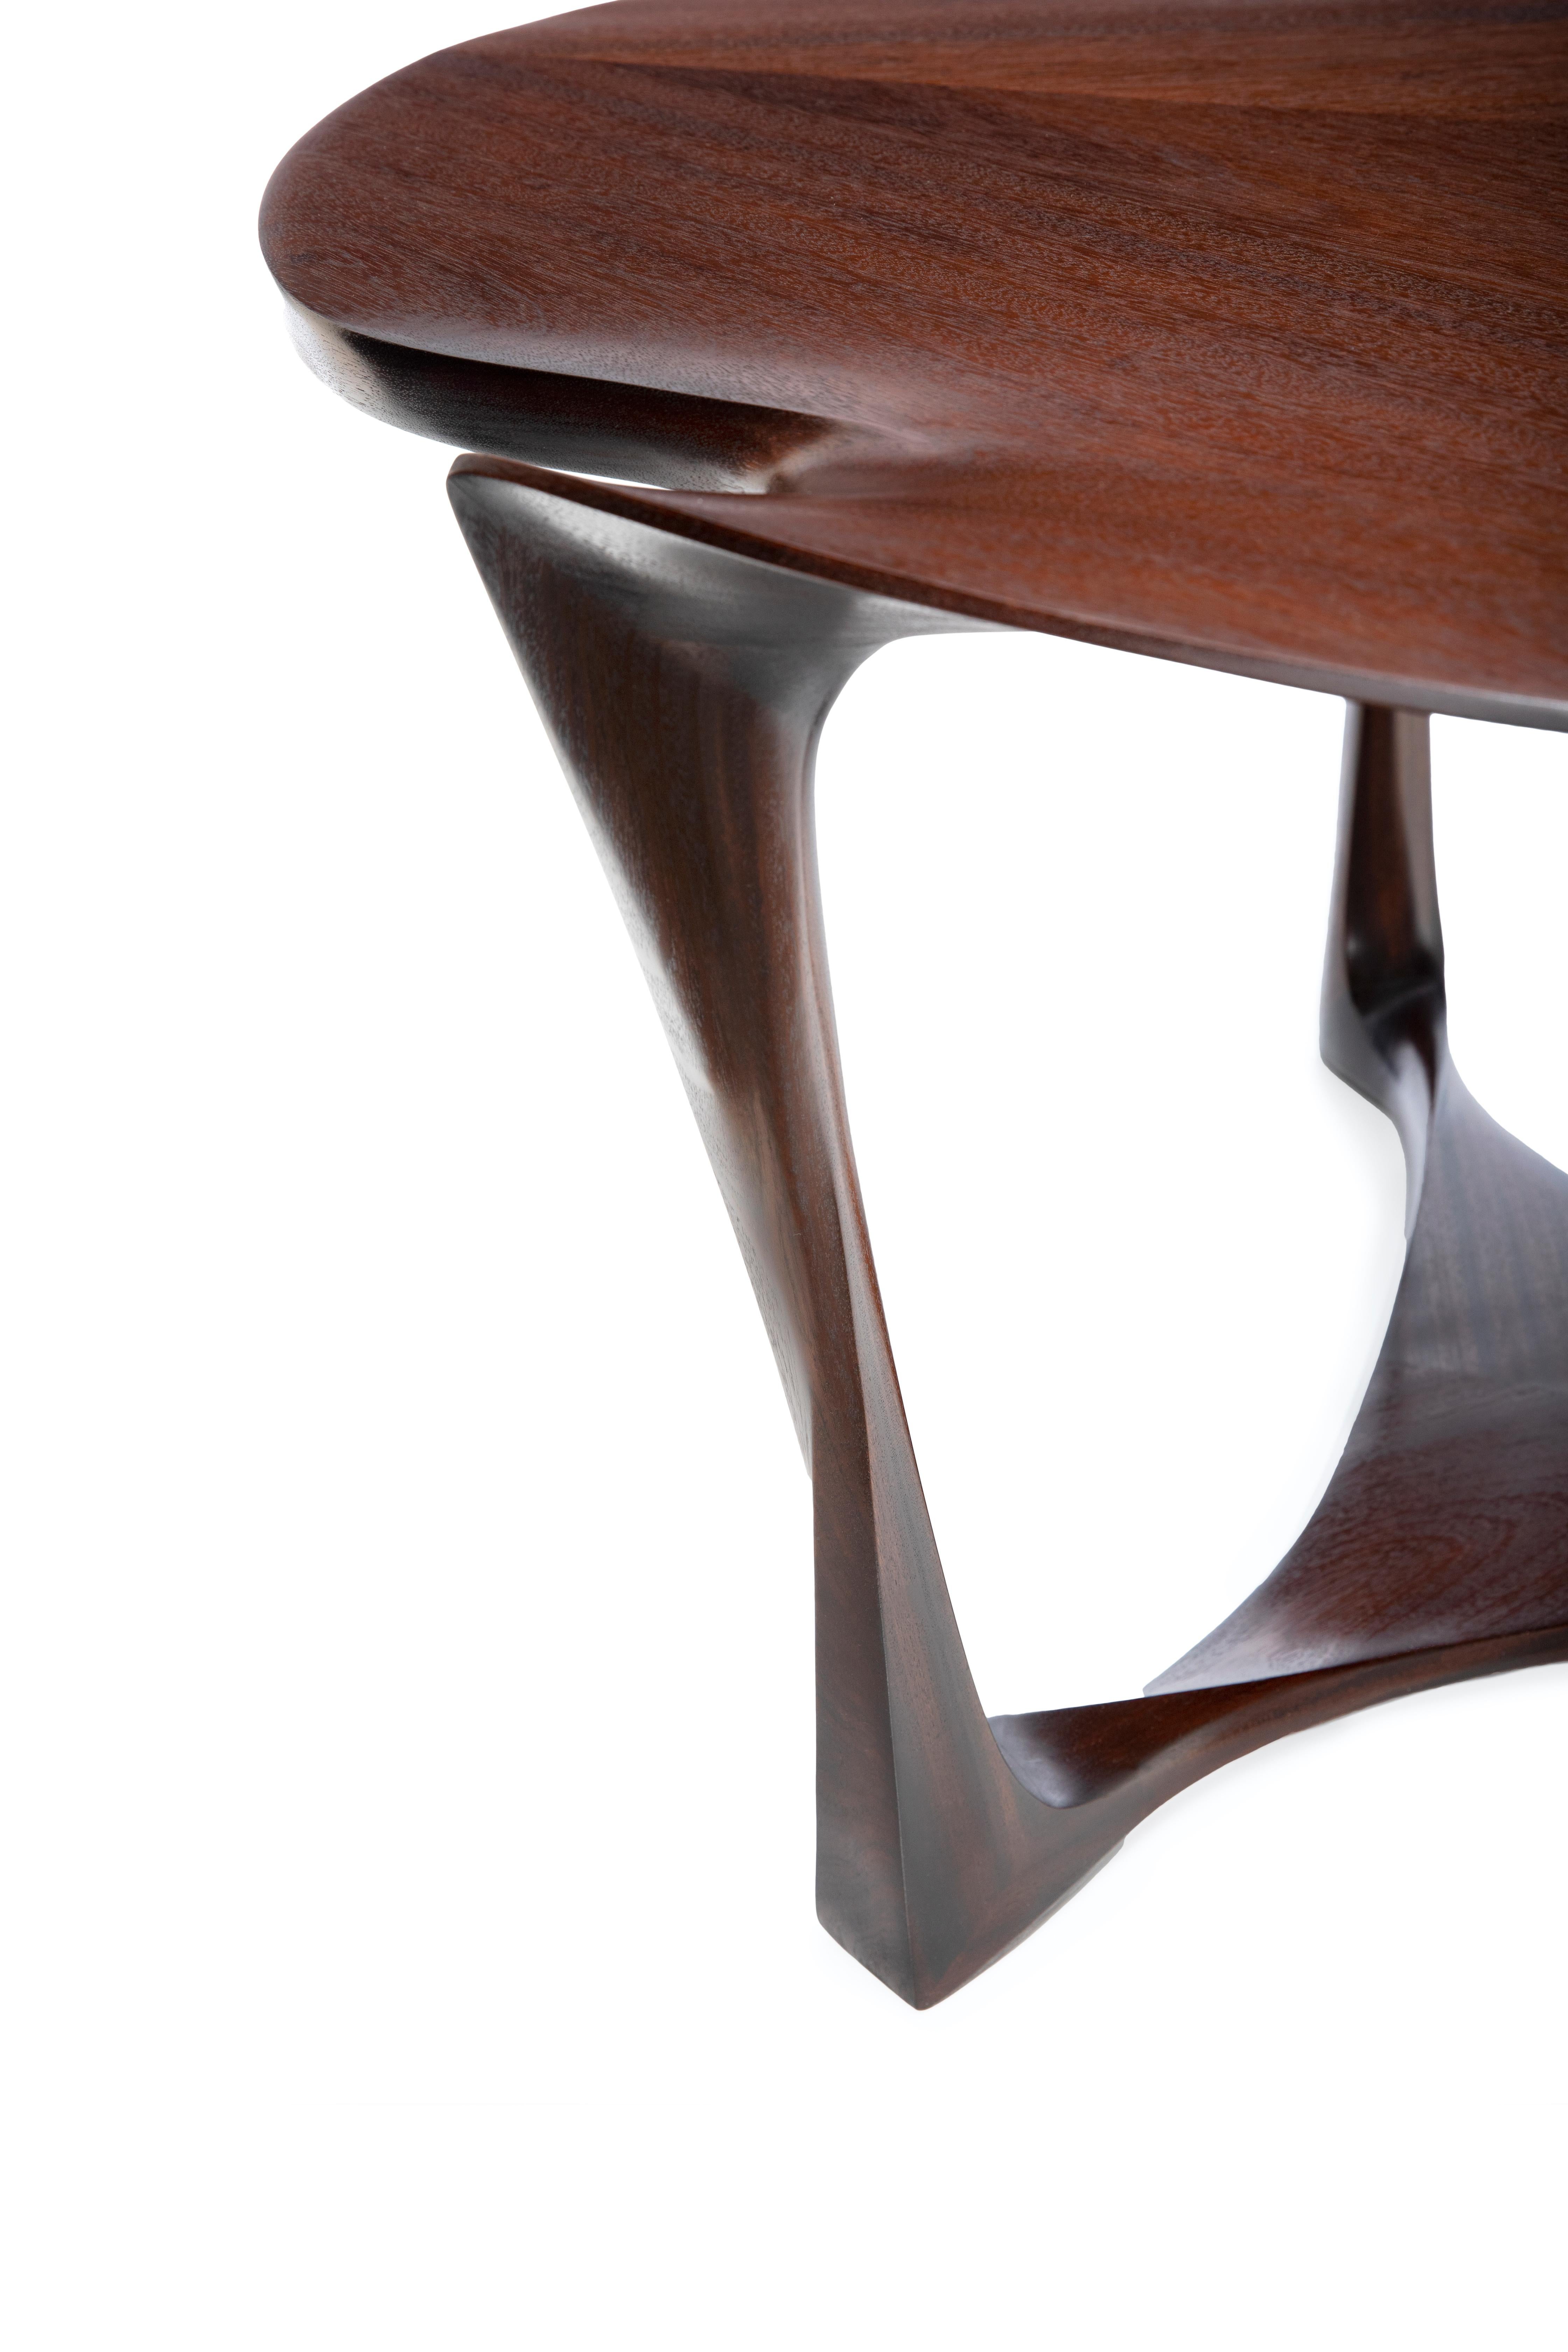 Sapele Wood ANTONI TABLE A Modern take on Art Nouveau. Sloping legs, Carved, Collectible. For Sale